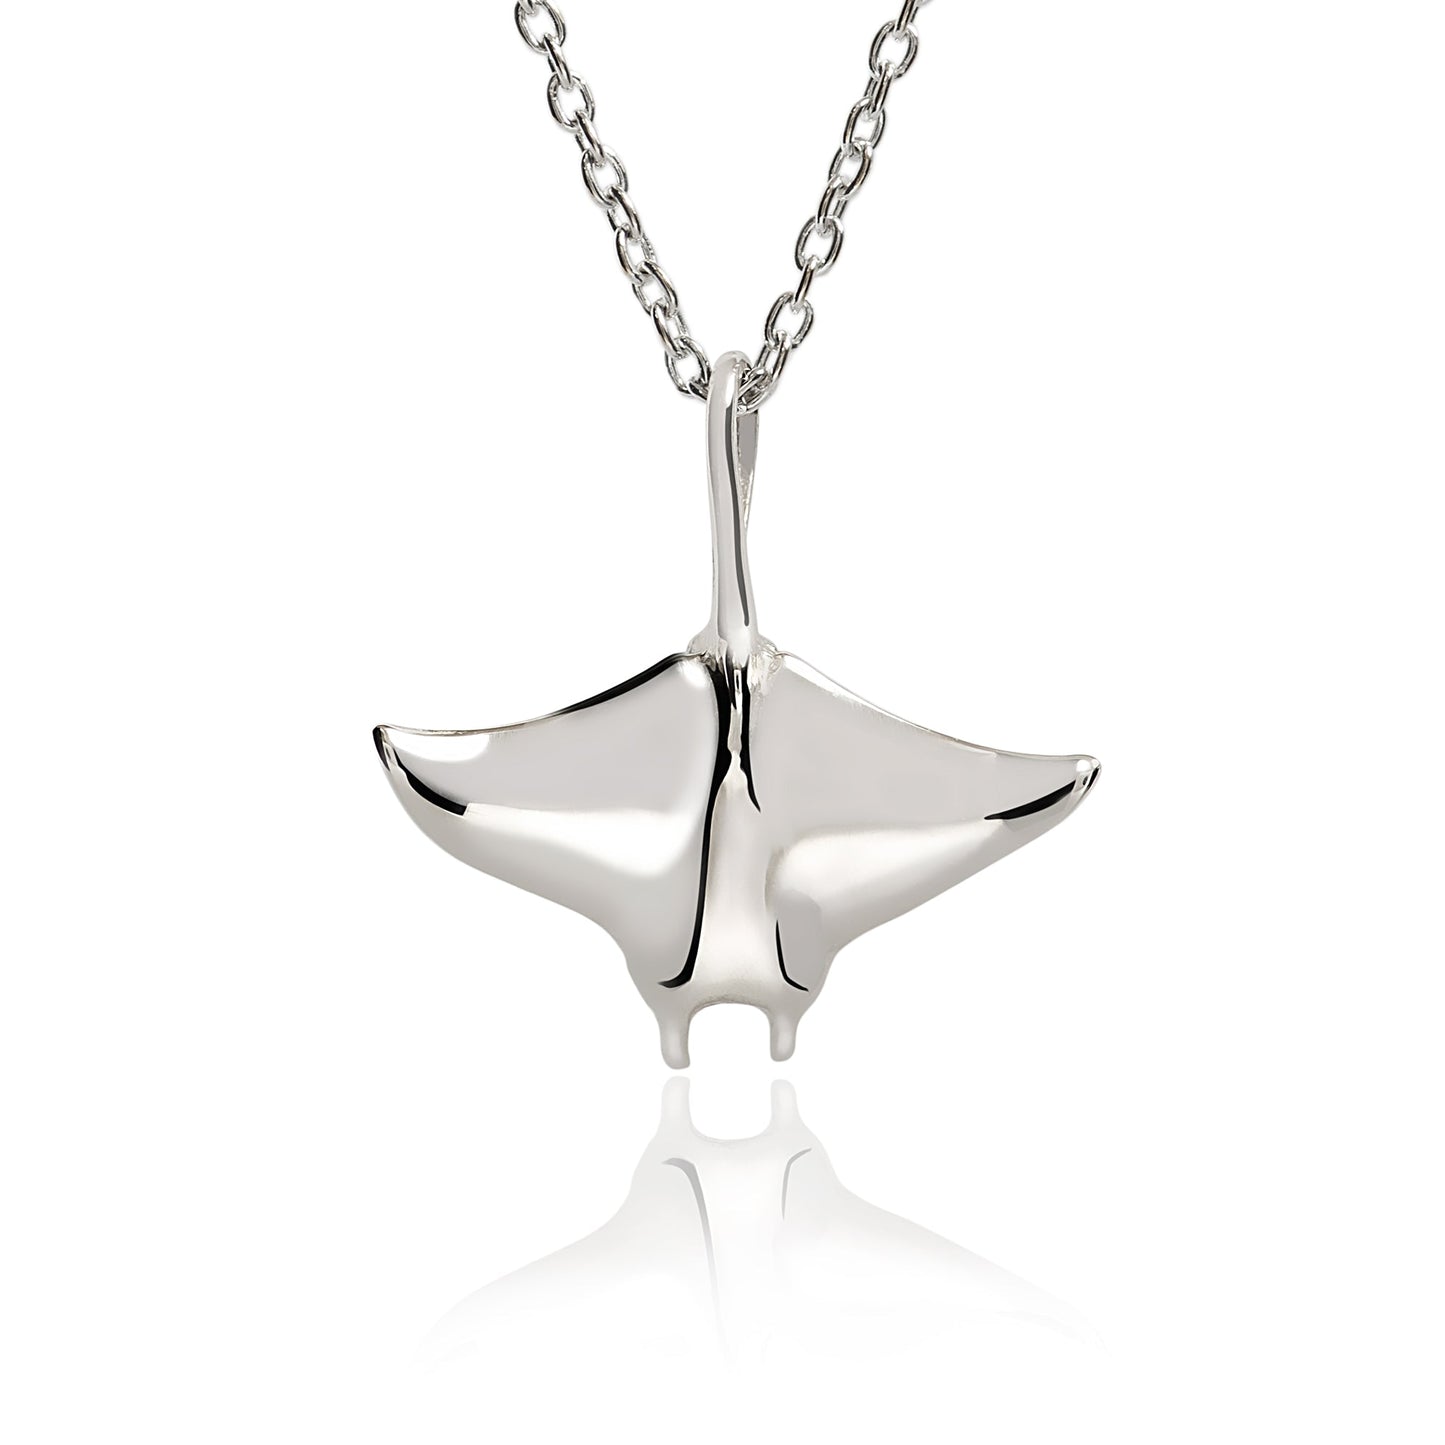 Stingray Necklaces for Women Sterling Silver- Manta Ray Necklace for Women, Stingray Charms, Small Manta Ray Necklaces - The Tool Store